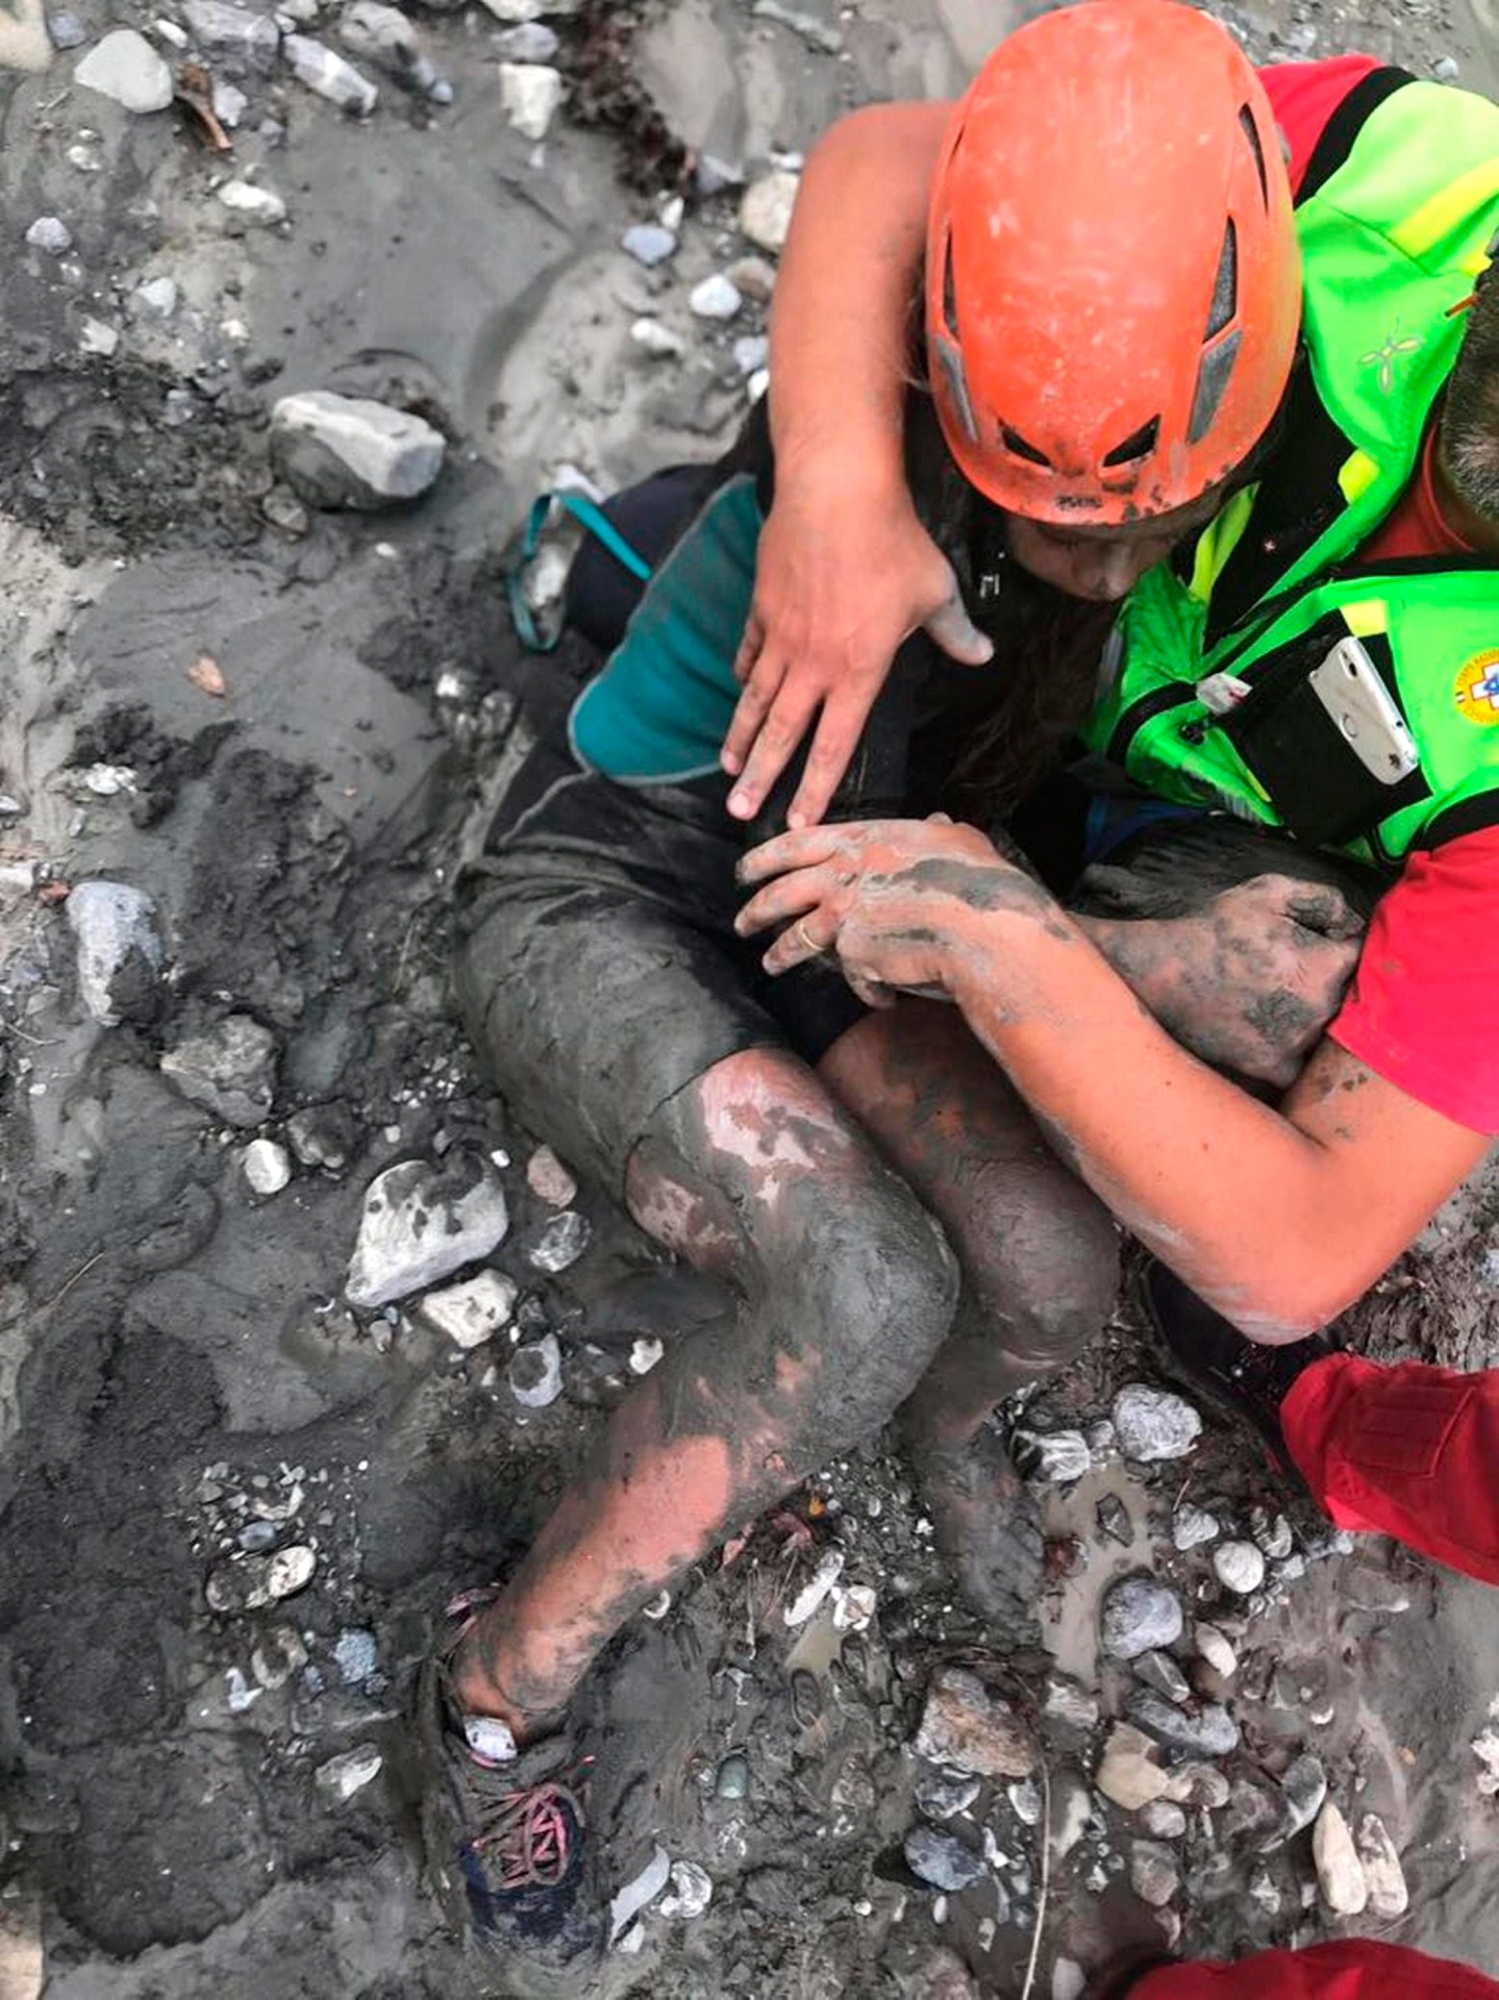 A girl is assisted by a member of the National Alpine and Caving Rescue Squad (CNSAS), in the Raganello Gorge in Civita, Italy, Tuesday Aug. 21, 2018.  Italy's civil protection agency says the death toll in a flash flood that swept away hikers in a narrow gorge in the southern region of Calabria has risen to 10. At least three others are missing, too. (ANSA via AP) Italy Flood